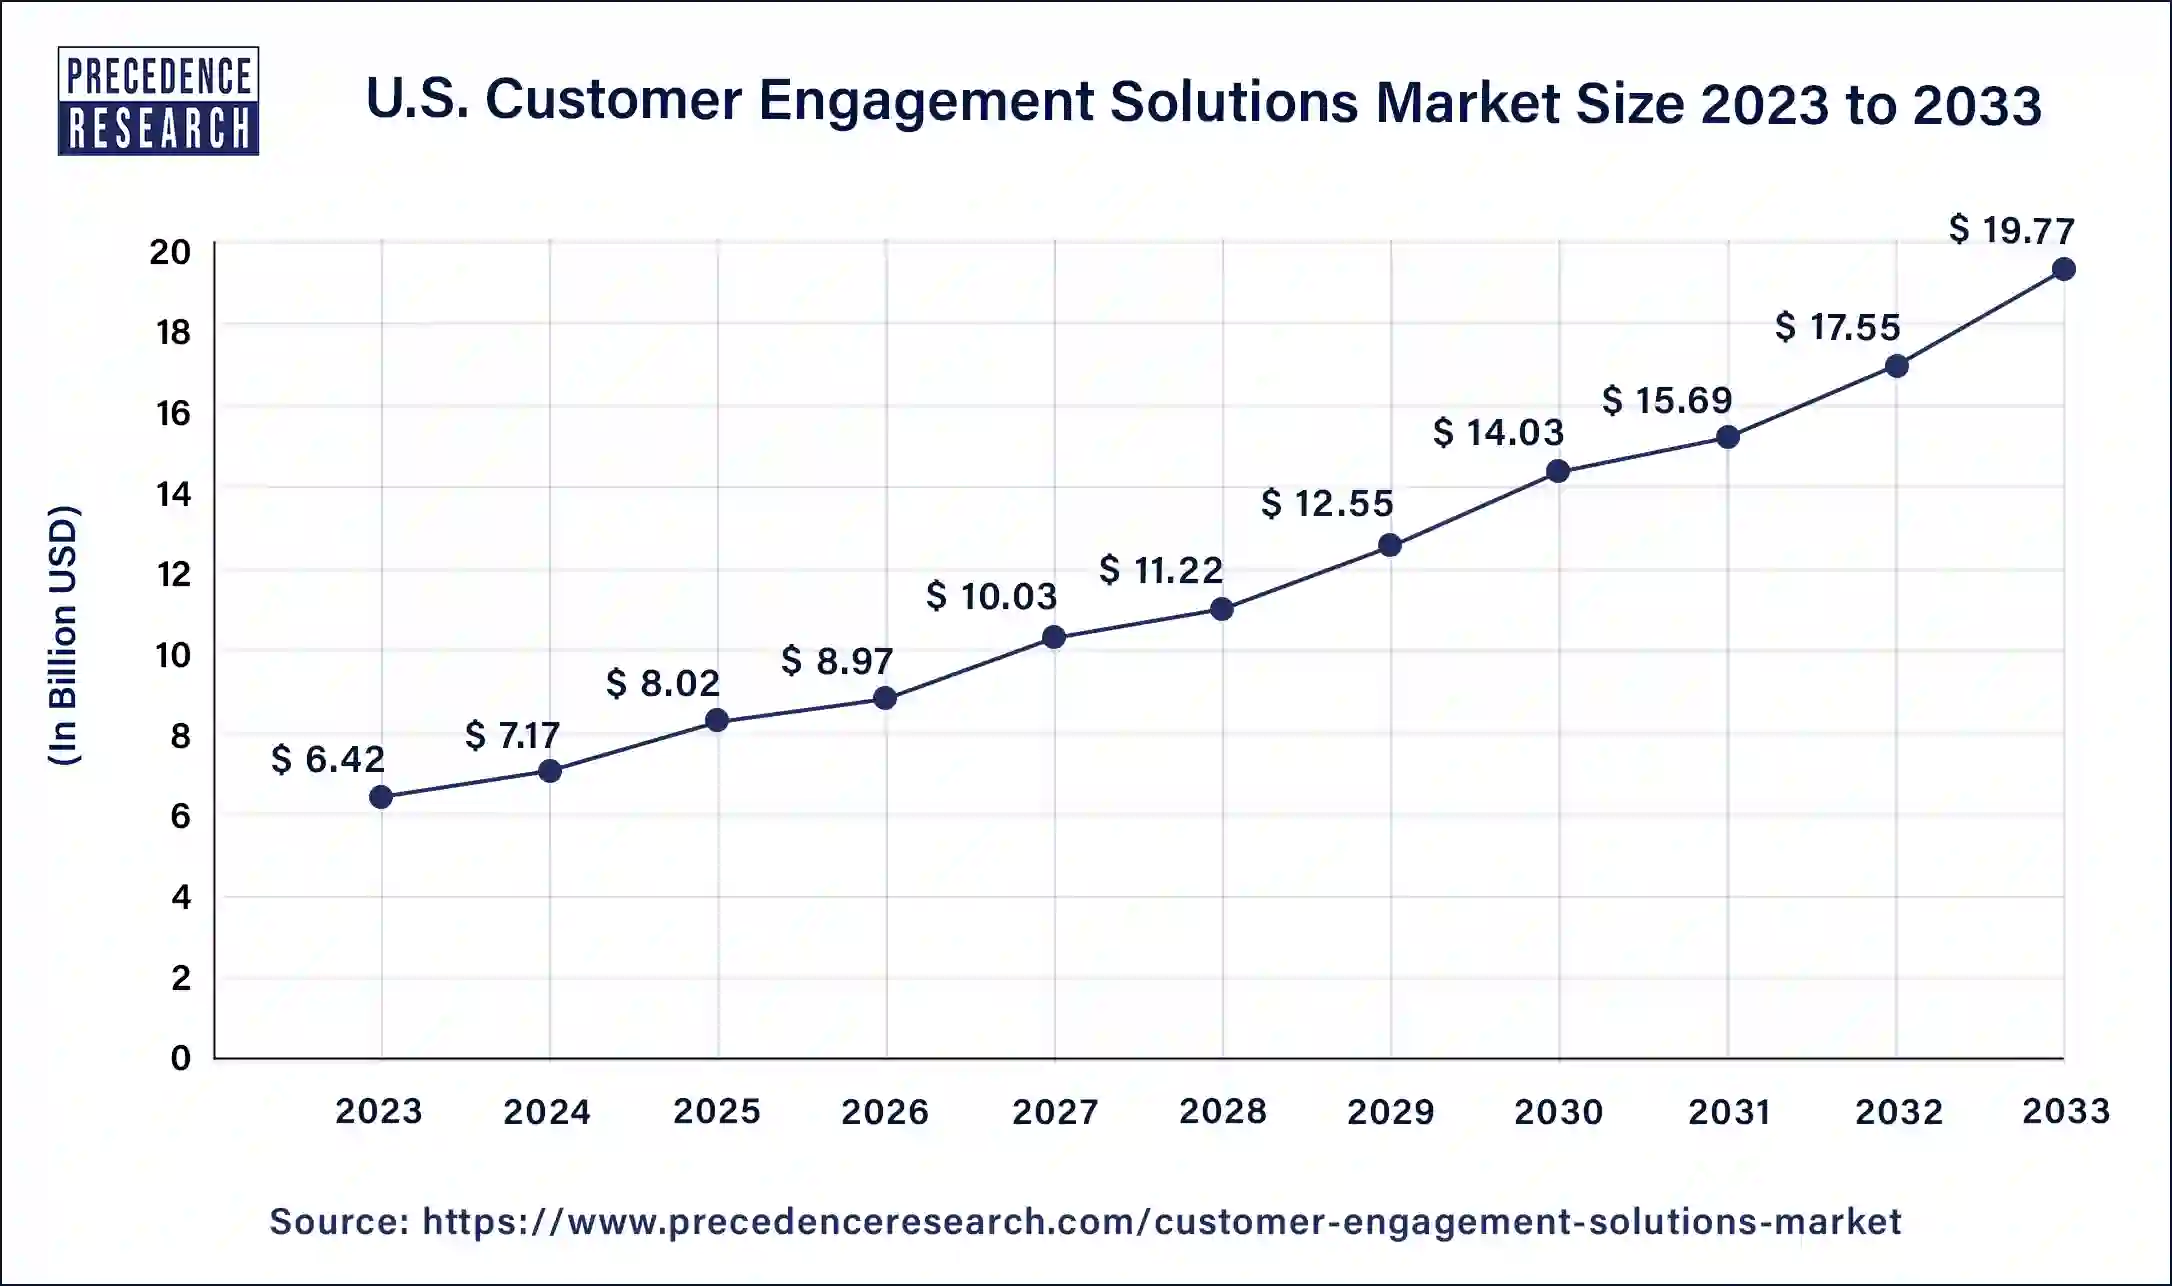 U.S. Customer Engagement Solutions Market Size 2024 to 2033